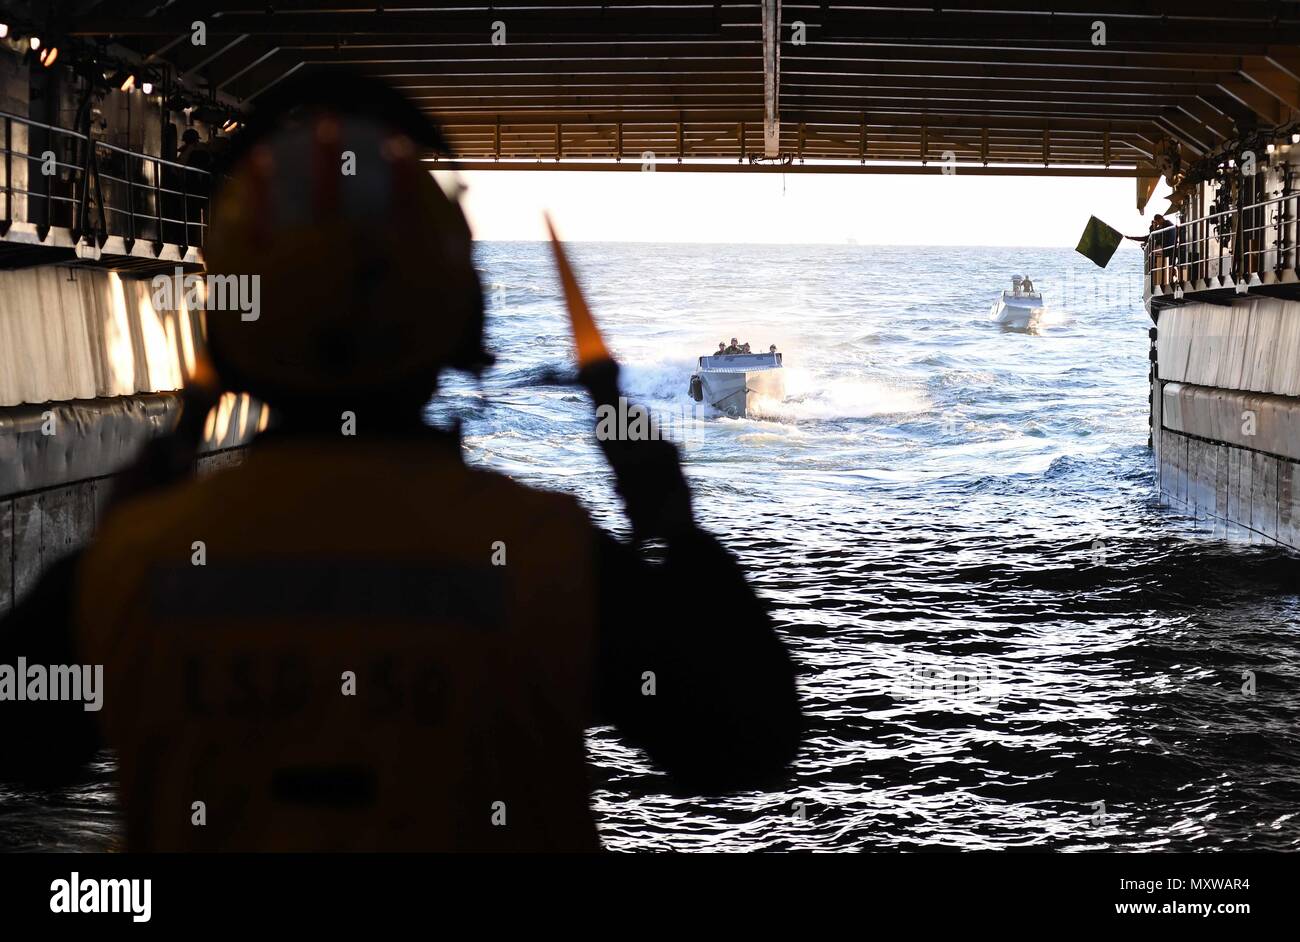 161209-N-ME988-712 ATLANTIC OCEAN (Dec. 09, 2016) – Sailors aboard the amphibious dock landing ship USS Carter Hall (LSD 50) direct Special Warfare Combatant-craft Crewmen (SWCC) with Special Boat Team (SBT) 20 into the ship’s well deck. The team practiced mooring and maneuvering their craft inside the ship’s well deck. Carter Hall is underway with the Bataan Amphibious Readiness Group (ARG) participating in ARG/Marine Expeditionary Unit Exercise (ARG/MEUEX). (U.S. Navy photo by Petty Officer 1st Class Darren M. Moore/Released) Stock Photo